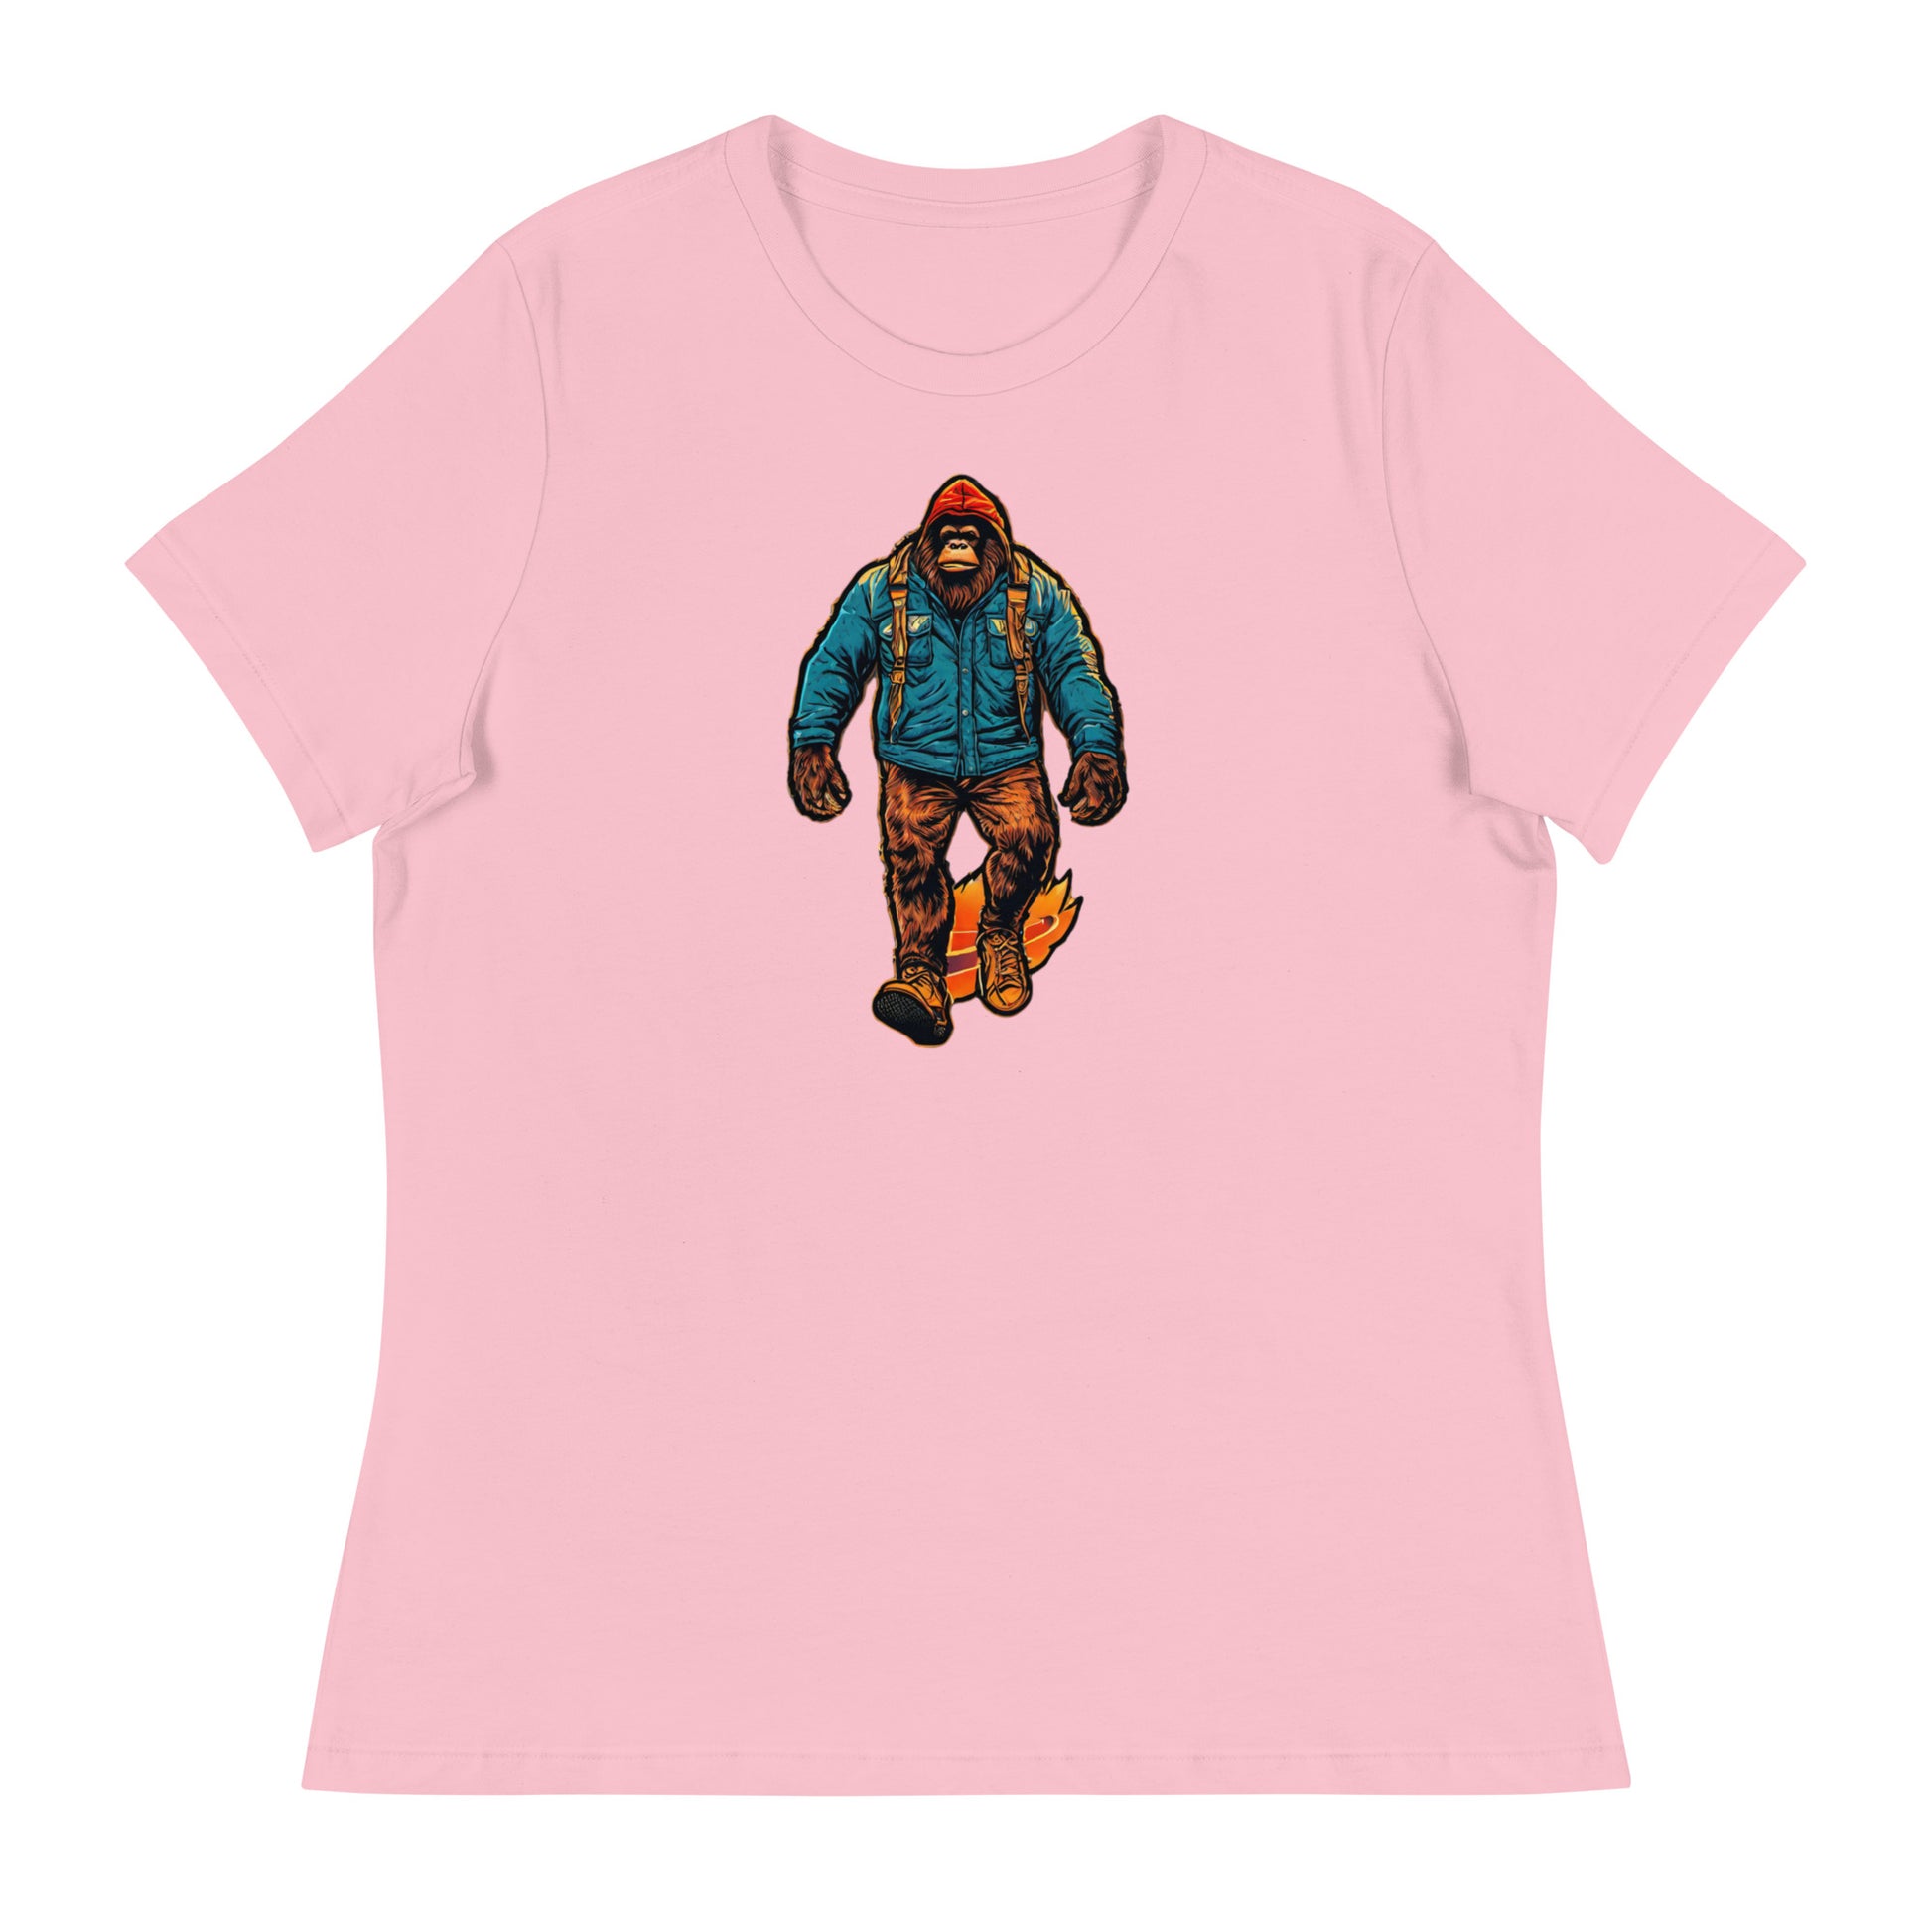 Bigfoot on a Hike Women's Graphic T-Shirt Pink